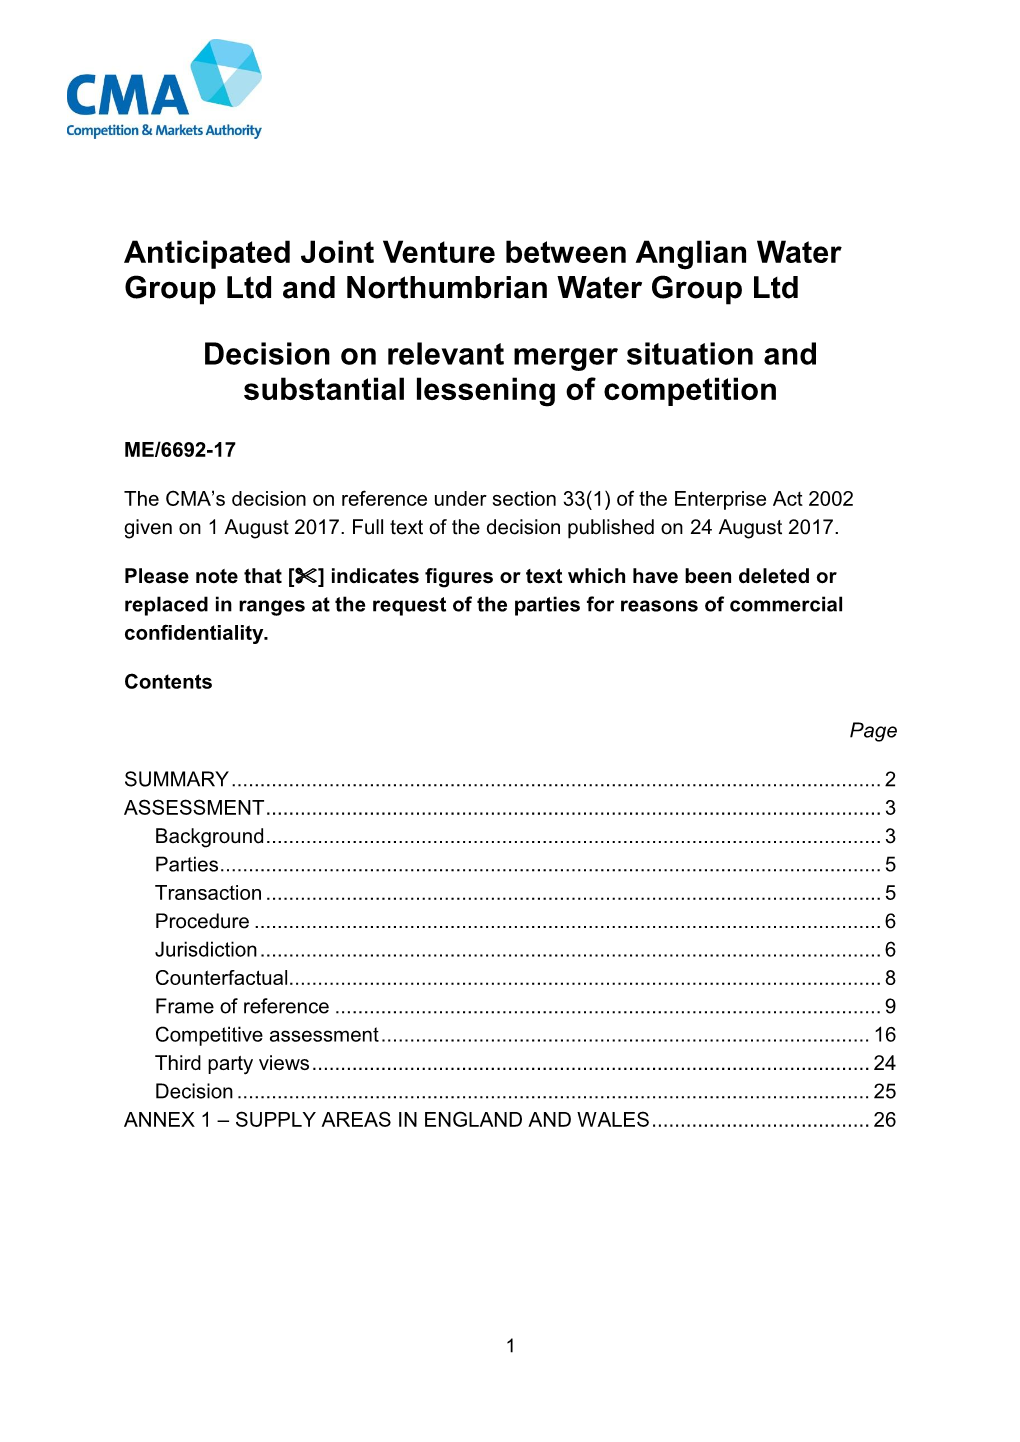 Anglian Water/Northumbrian Water Merger